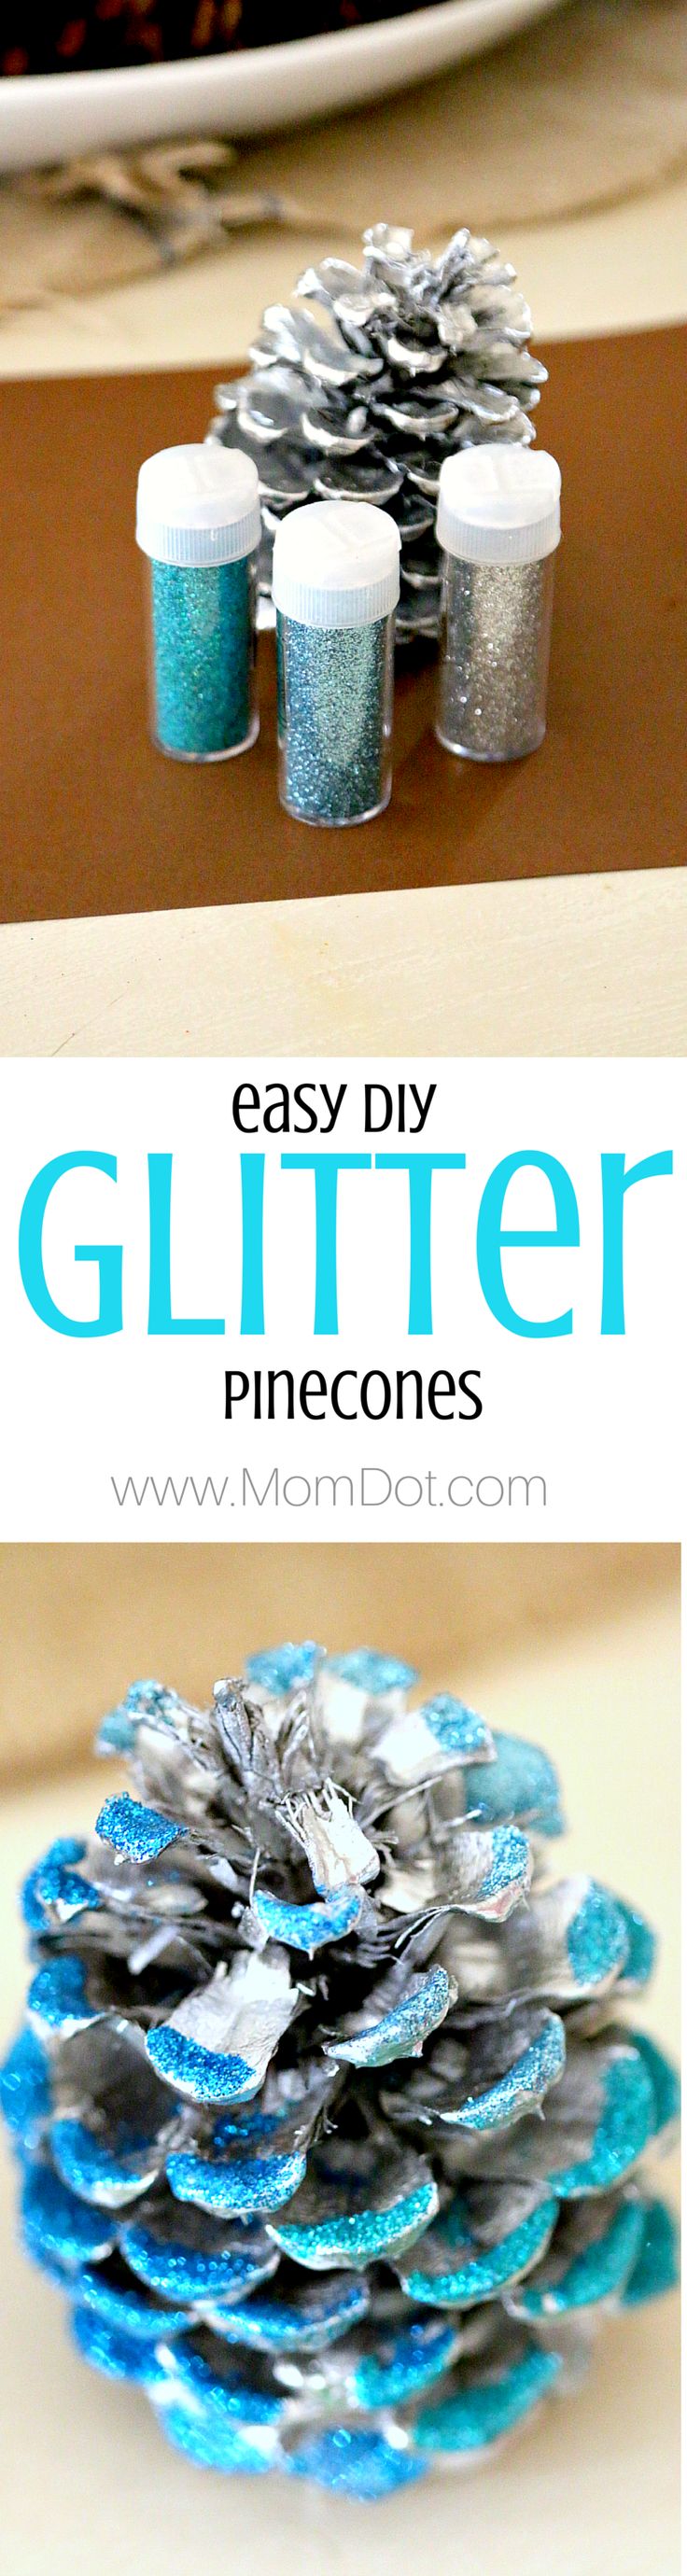 Glitter Pinecone DIY, how to take a regular pinecone and make it look like store bought decor- for half the cost! tutorial and inspiration